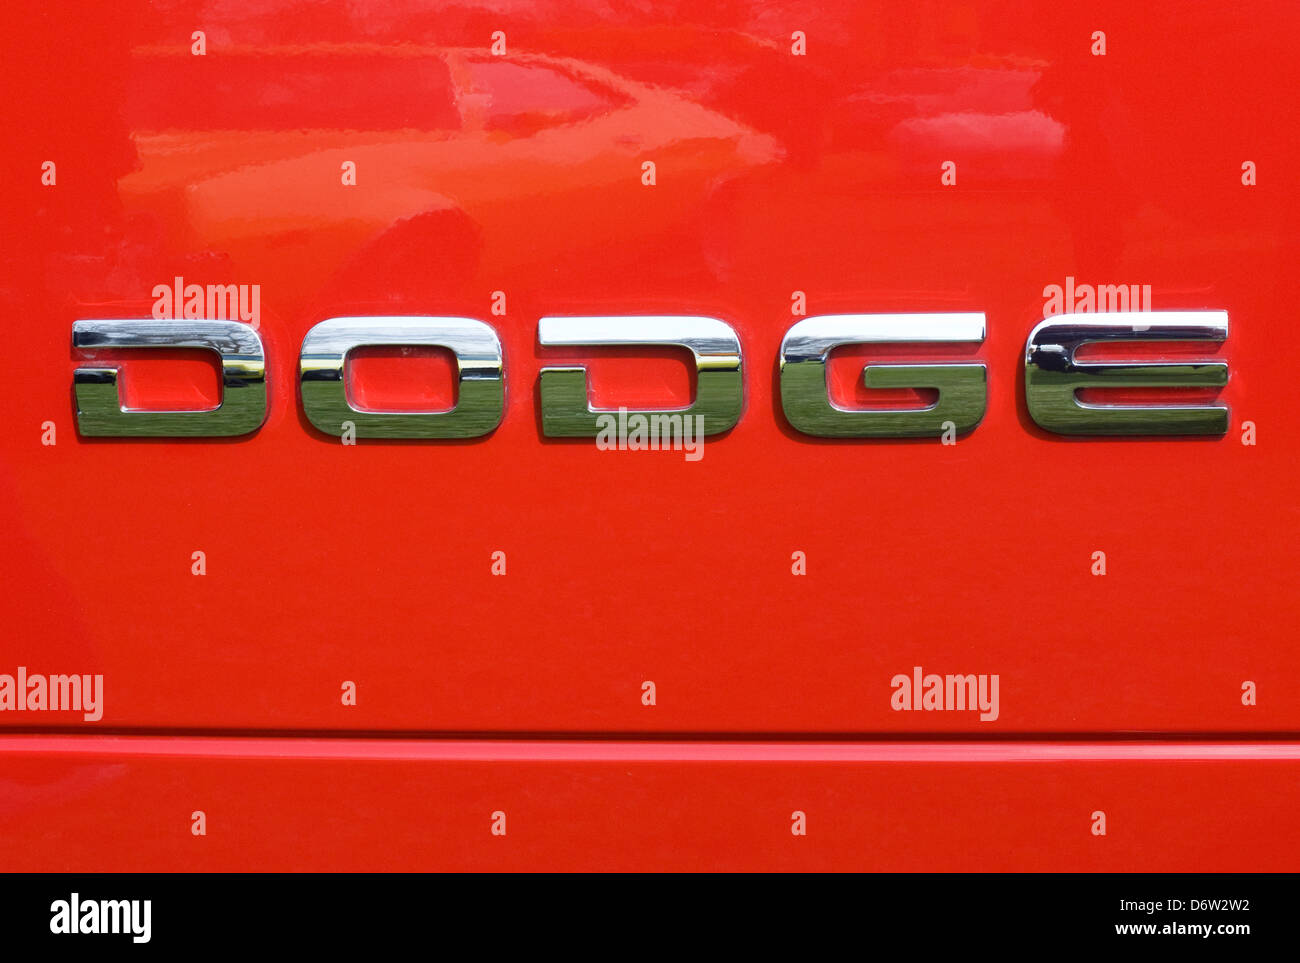 Dodge Challenger Silver Name Plate Stock Photo